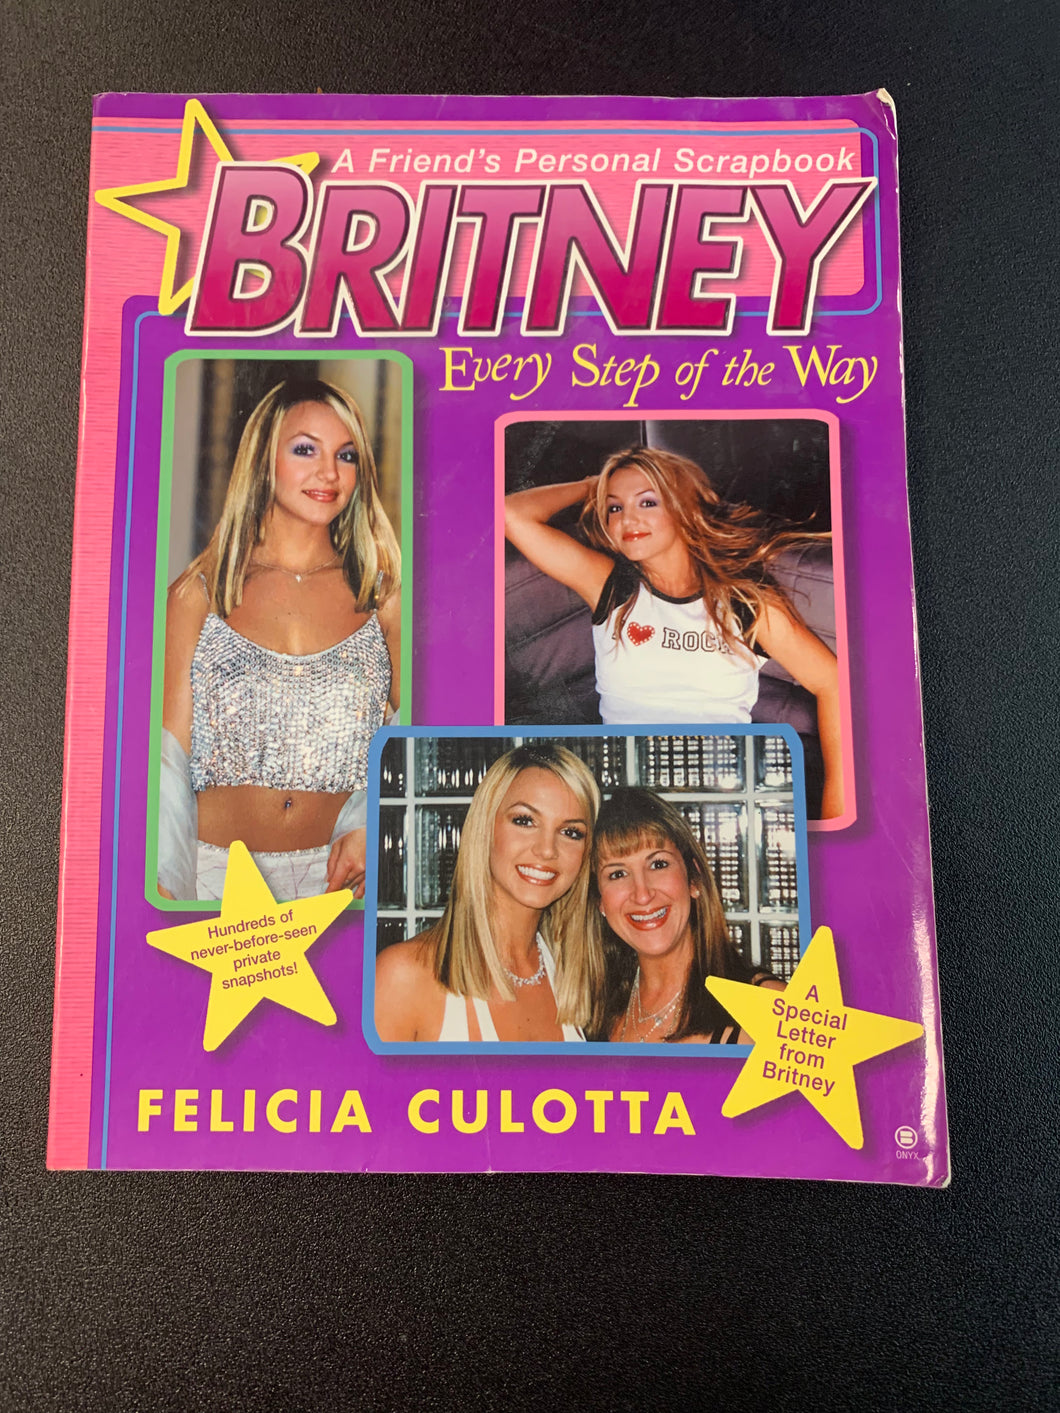 ONYX FELICIA CULOTTA A FRIEND’S PERSONAL SCRAPBOOK BRITNEY SPEARS EVERY STEP OF THE WAY USED DAMAGED